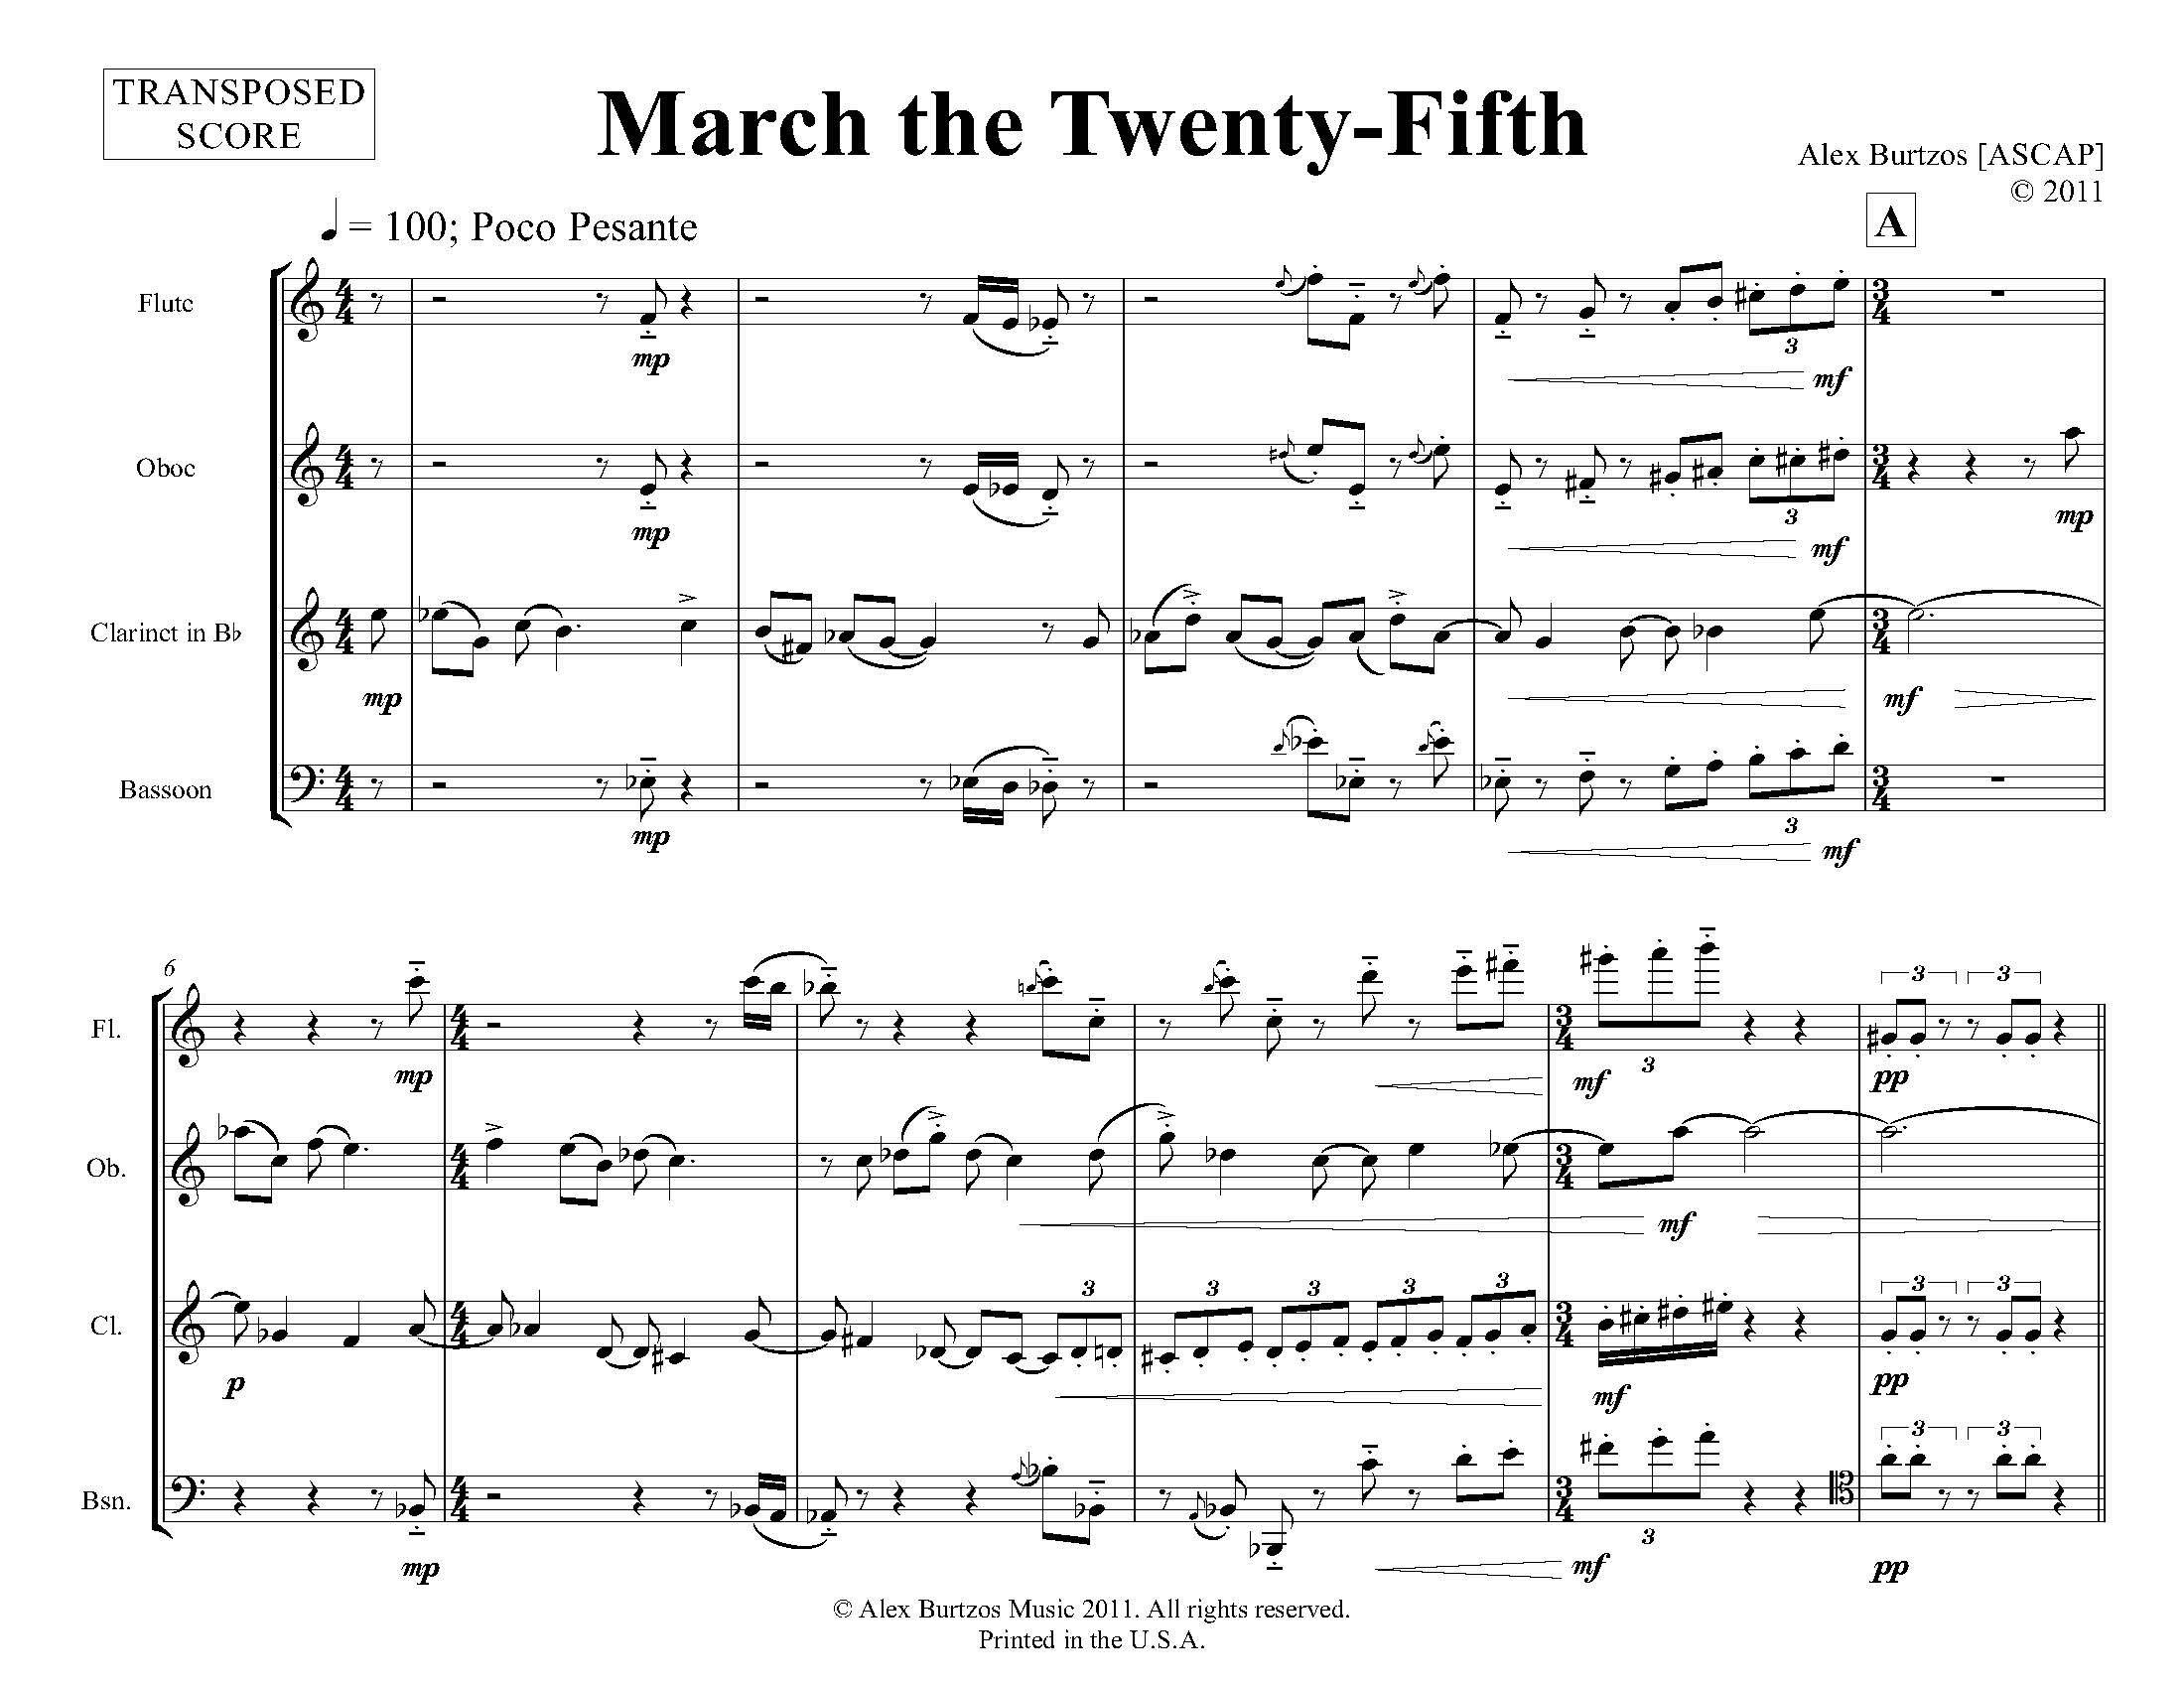 March the Twenty-Fifth - Complete Score_Page_07.jpg